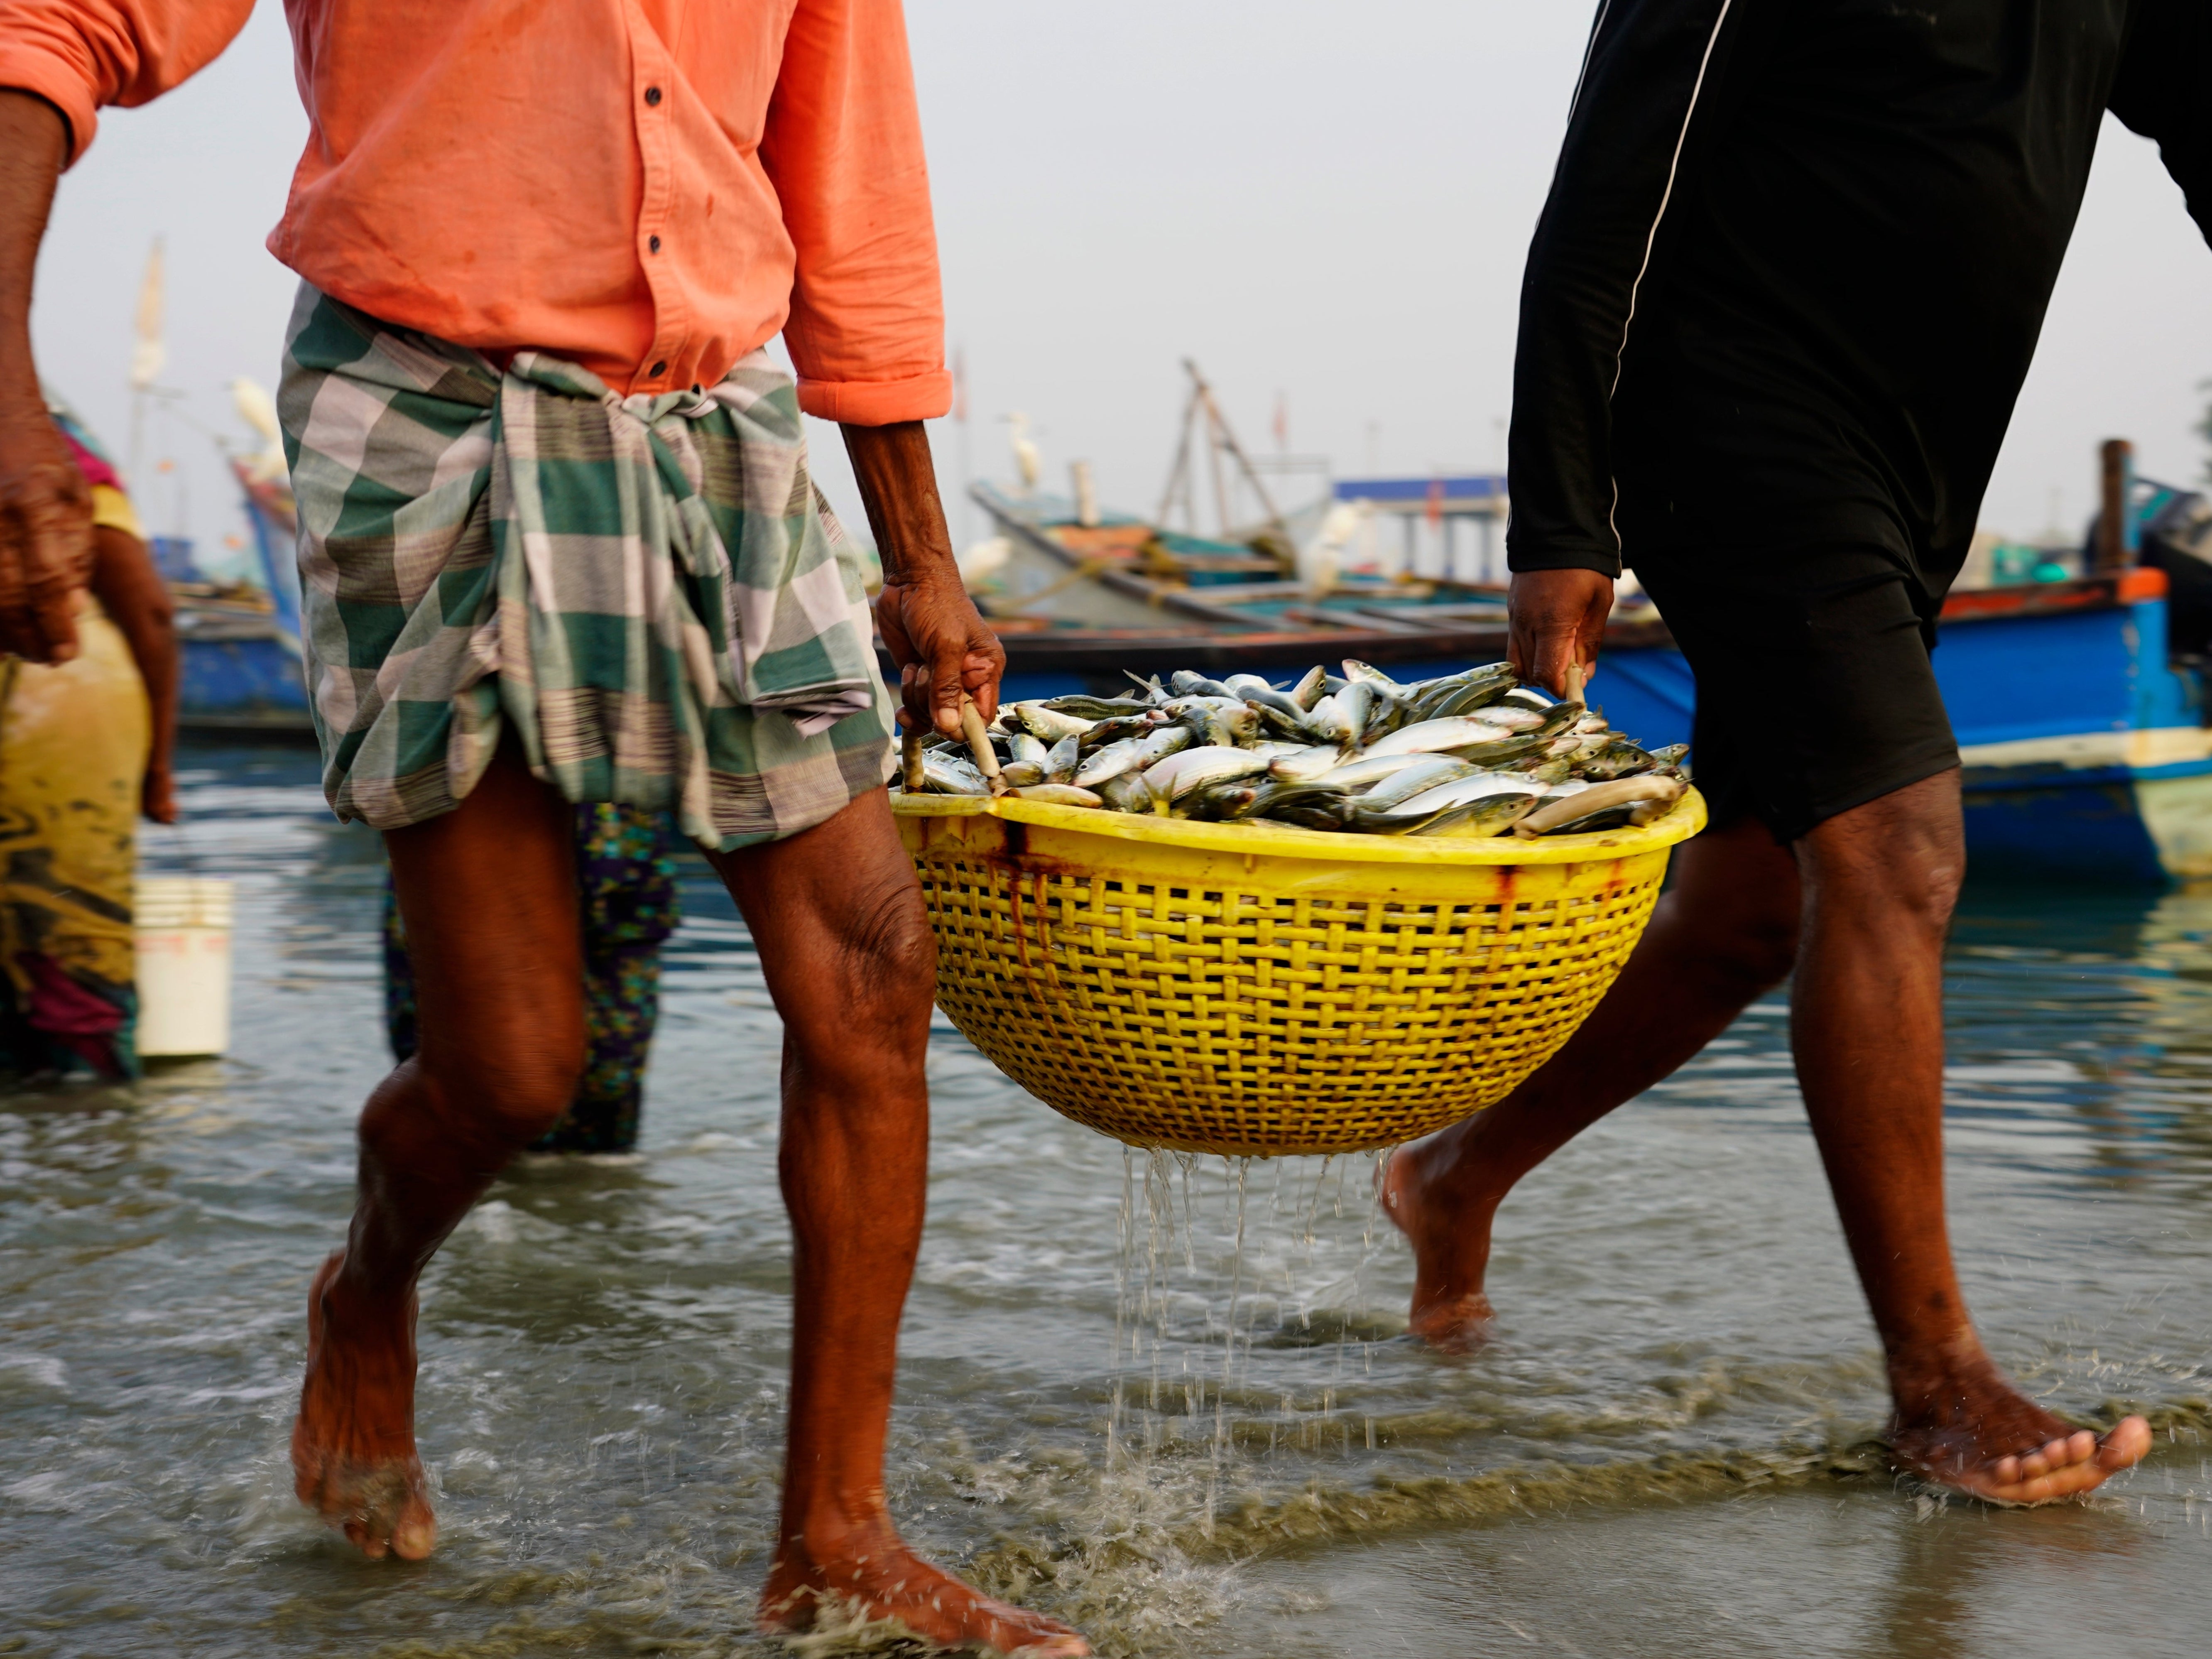 Fishermen bring in their day’s catch in the Chellanam area of Kochi, Kerala state, India, in March